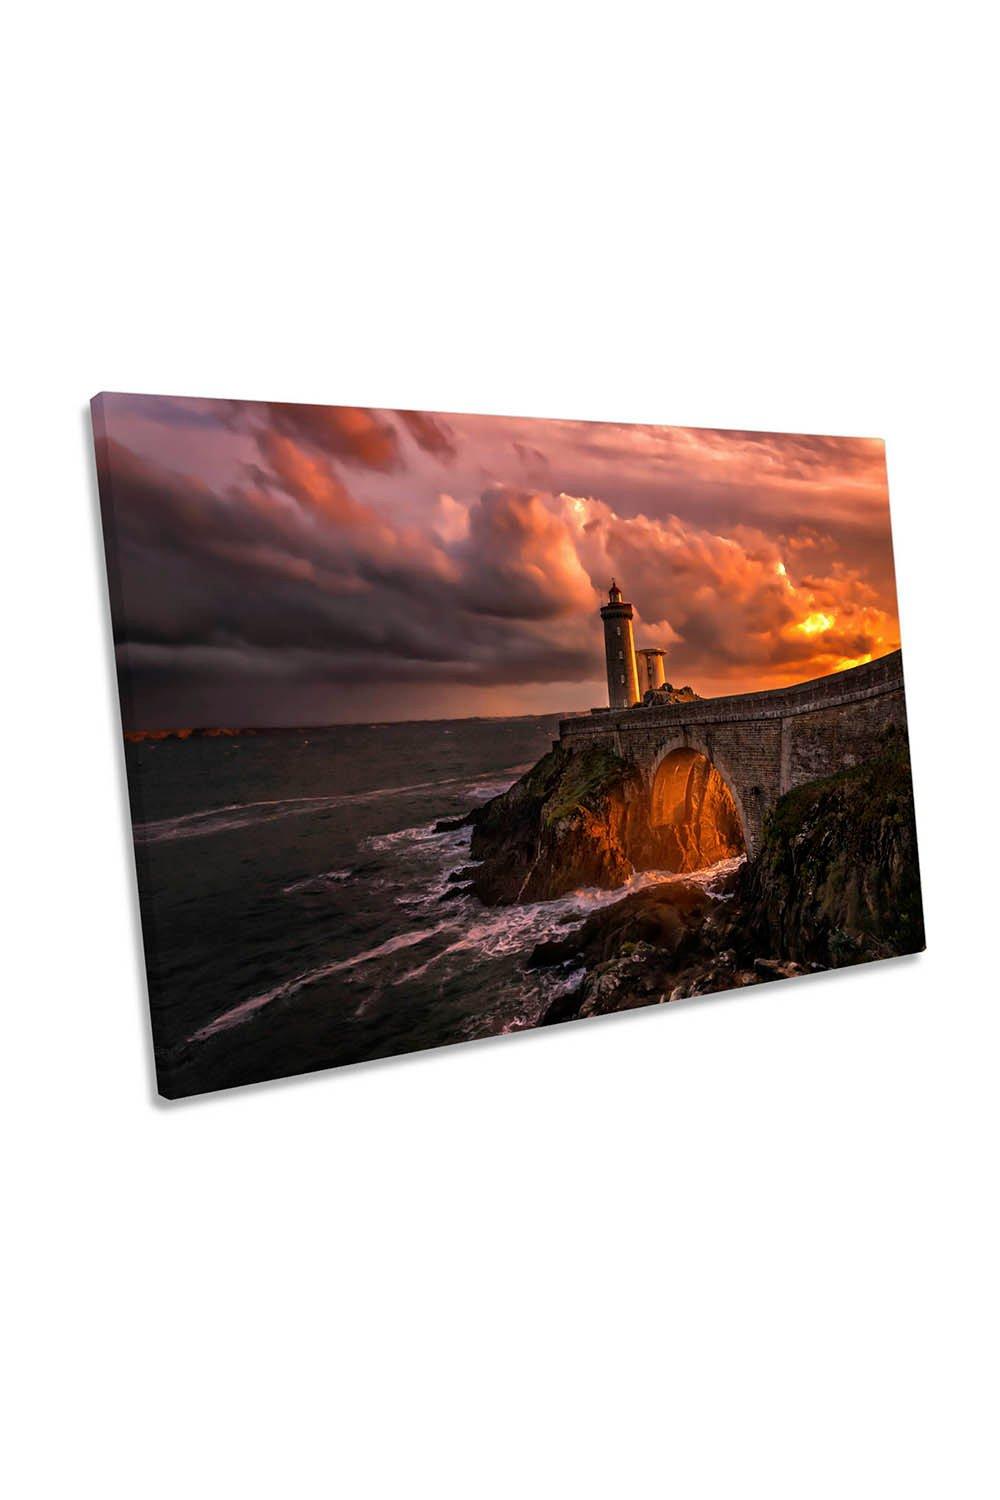 Sun is Down Lighthouse Sunset Brittany Canvas Wall Art Picture Print